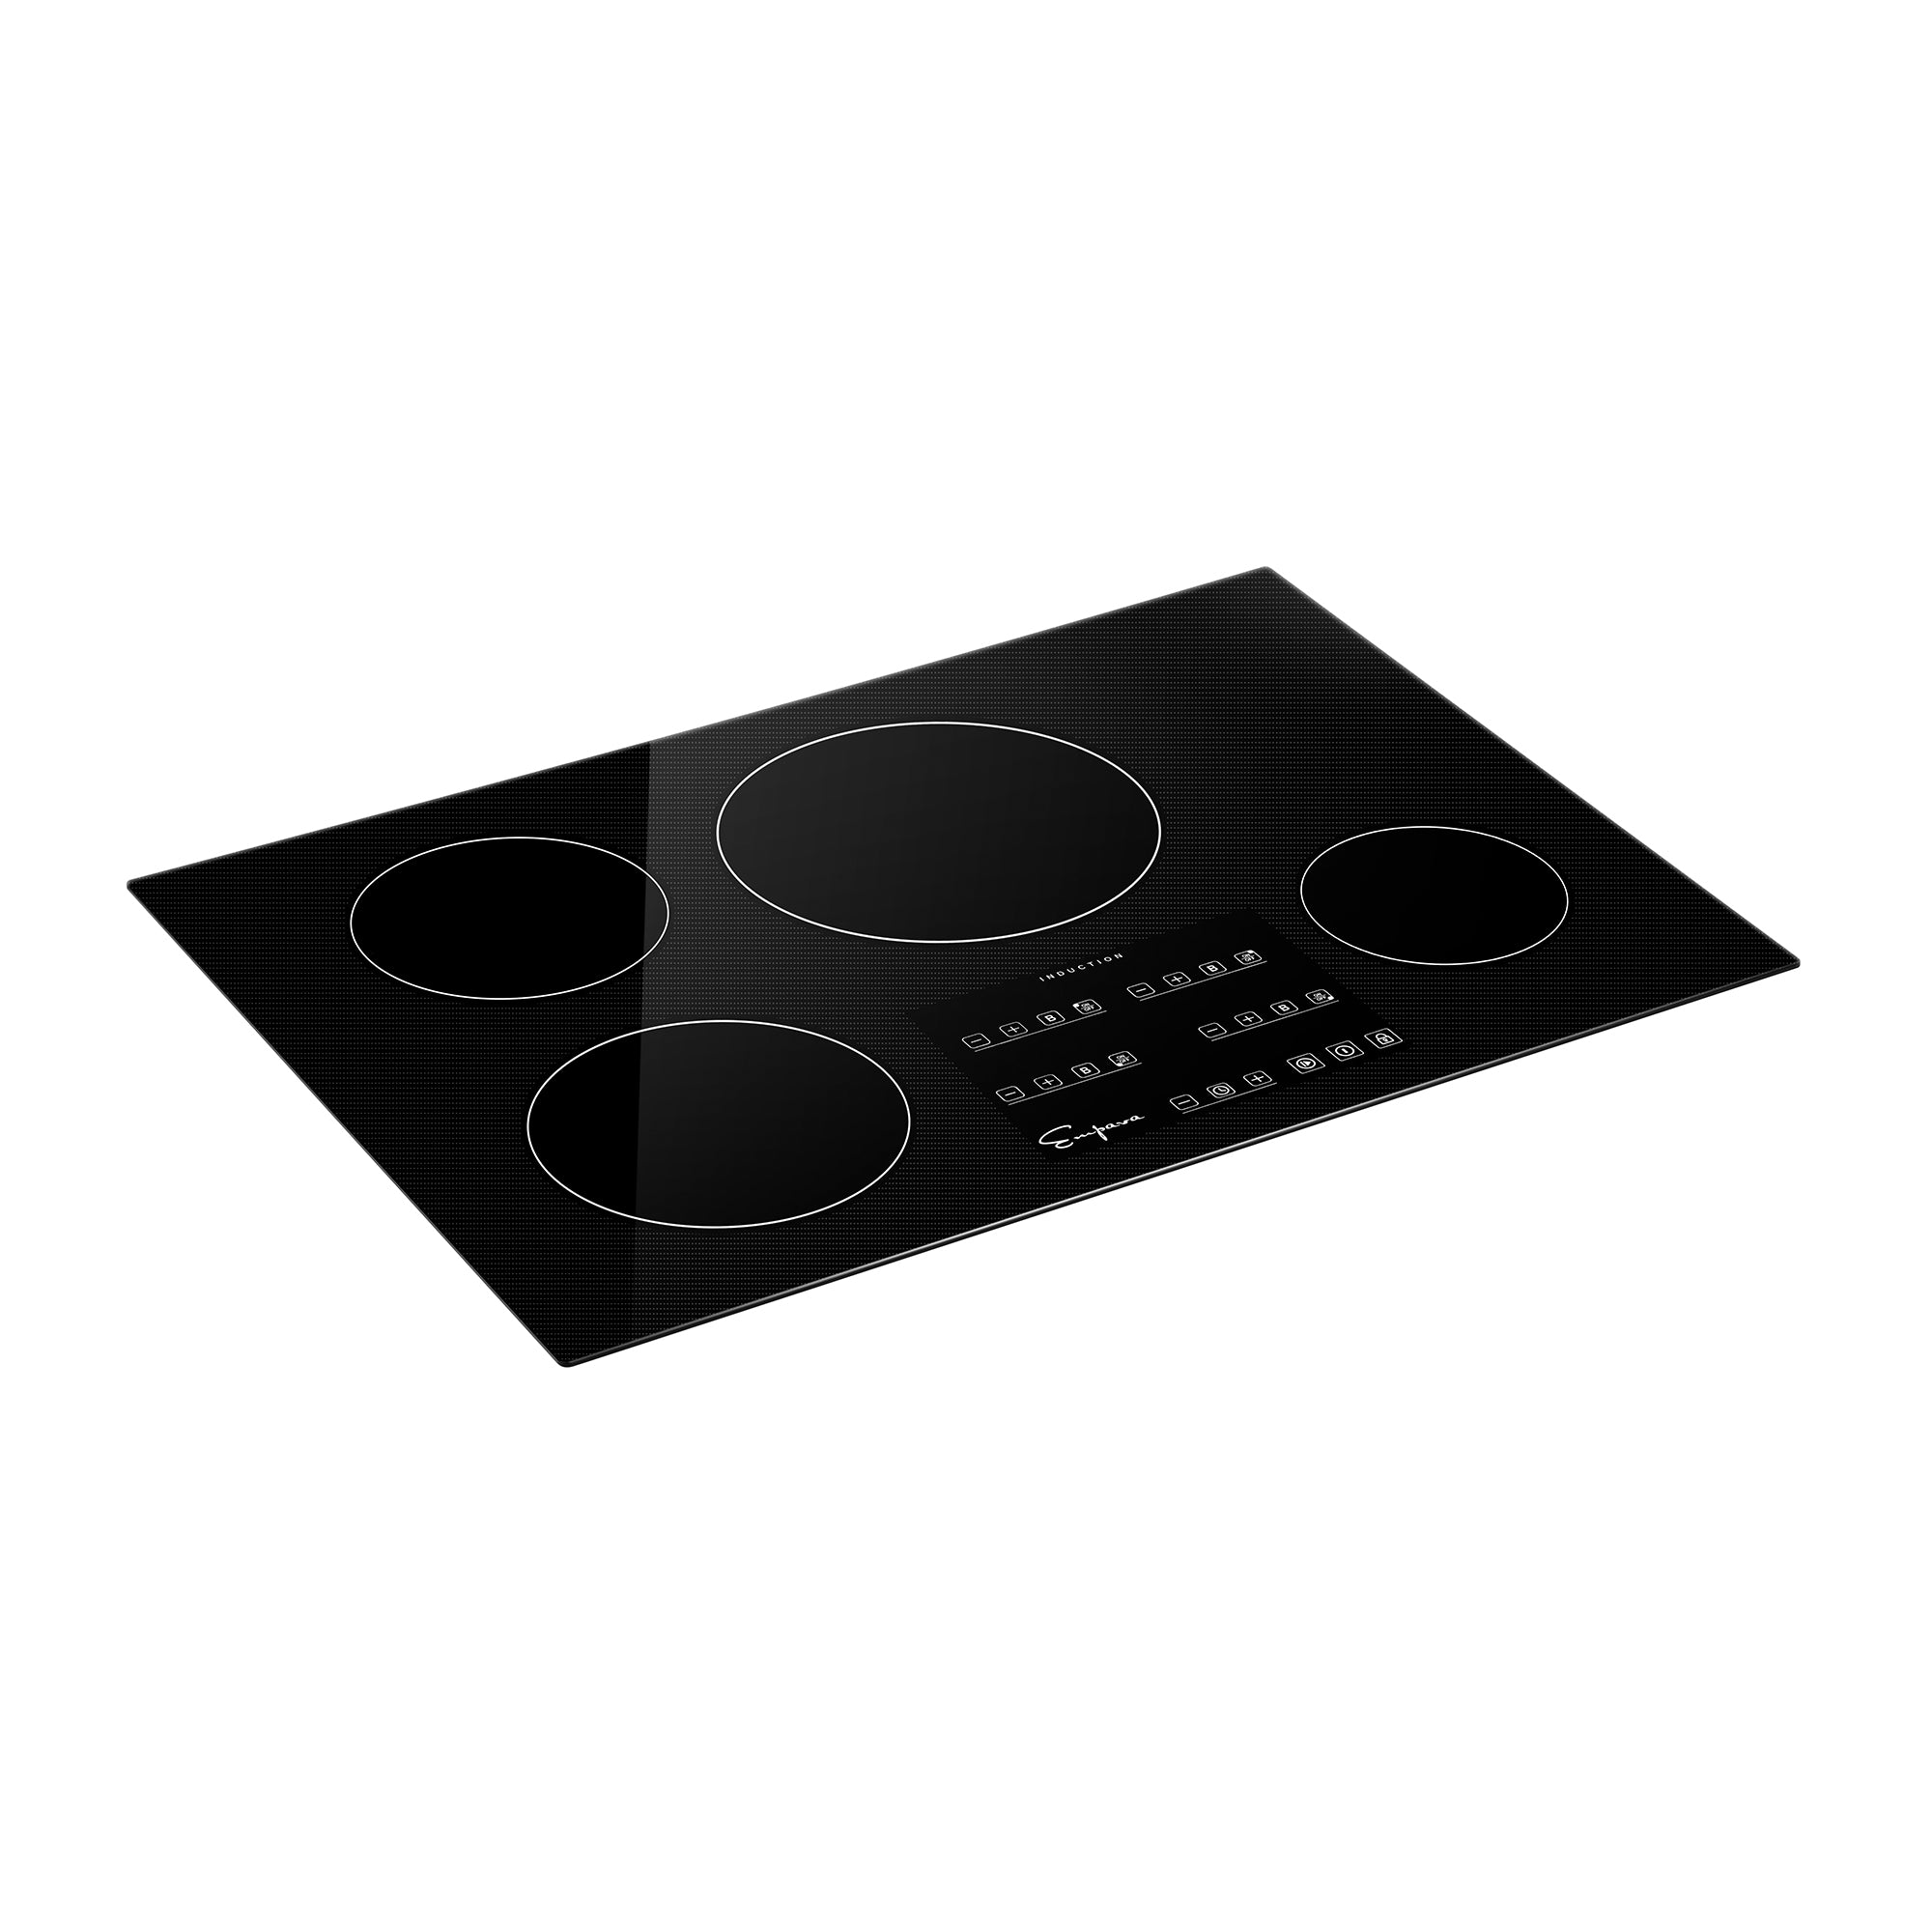 Empava 30 inch Electric Induction Cooktop Smooth Surface with 4 Burners 240V, Black